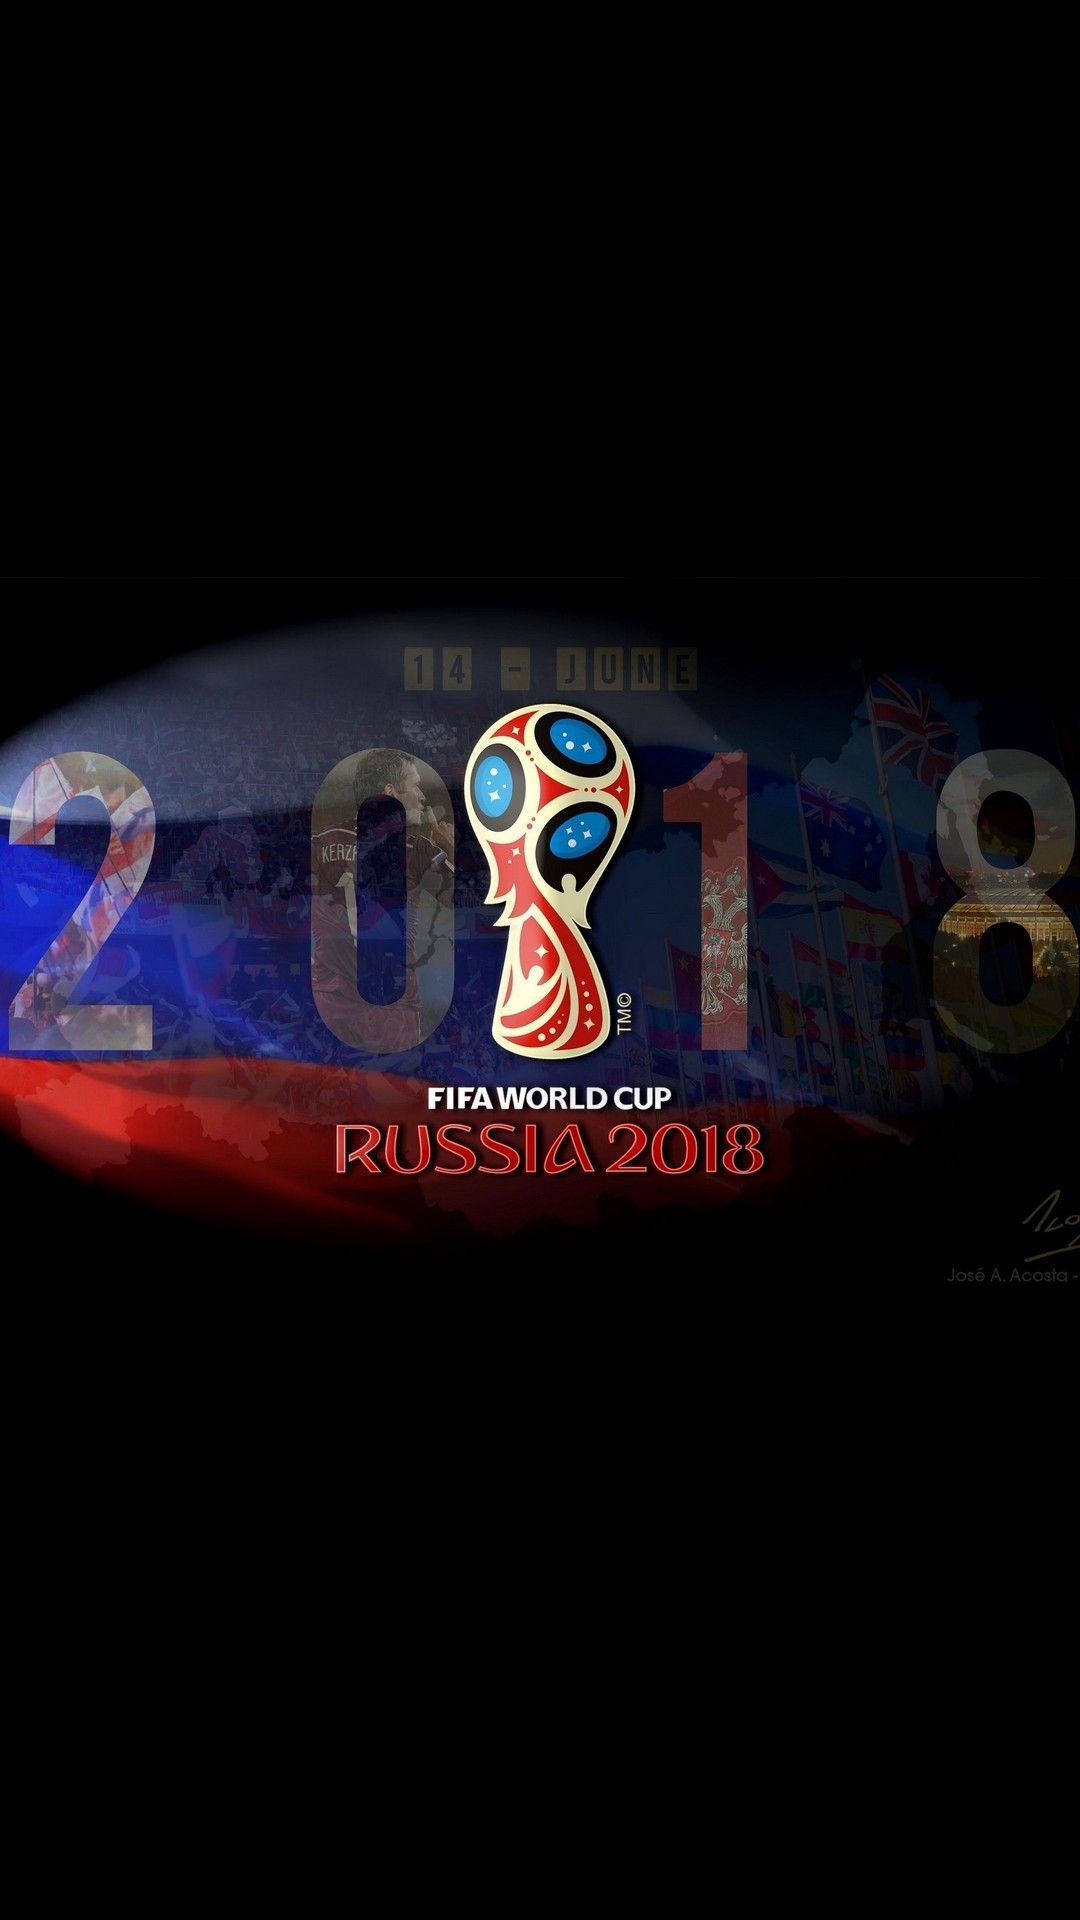 World Cup Qatar 2022 Wallpapers  Top Free World Cup Qatar 2022 Backgrounds   WallpaperAccess